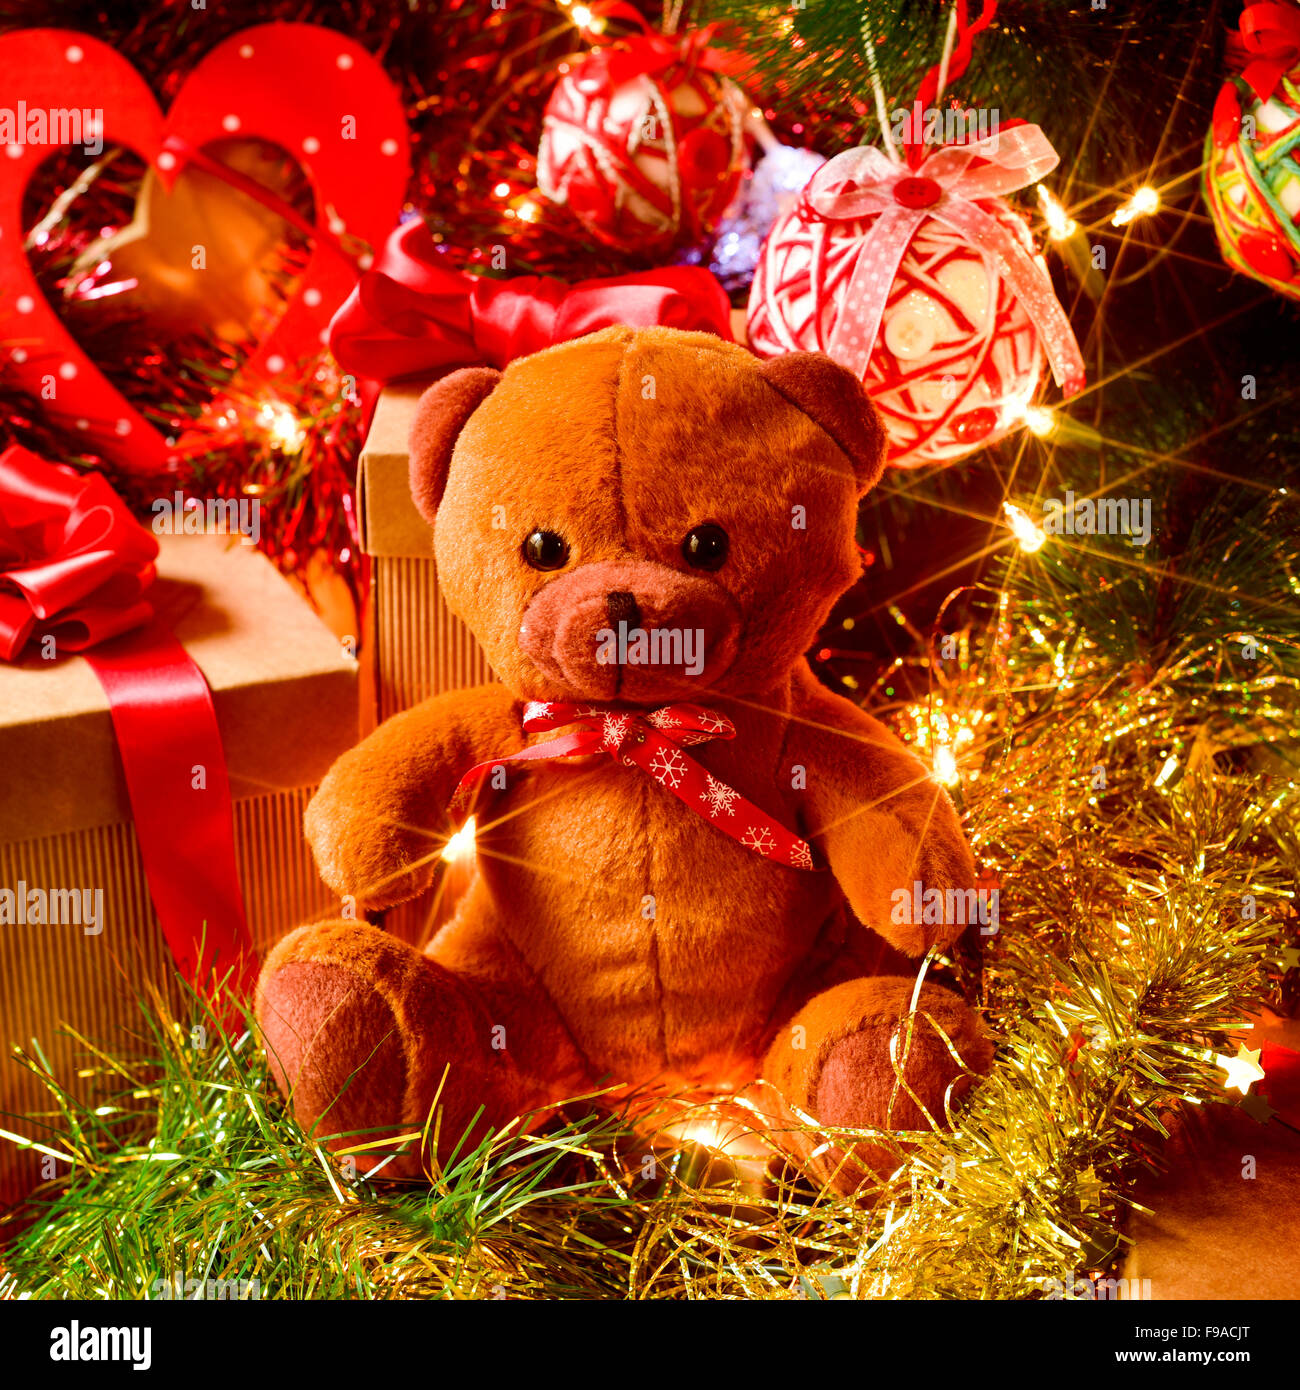 closeup of a brown teddy bear and some gifts under a christmas tree ornamented with lights, balls and tinsel Stock Photo